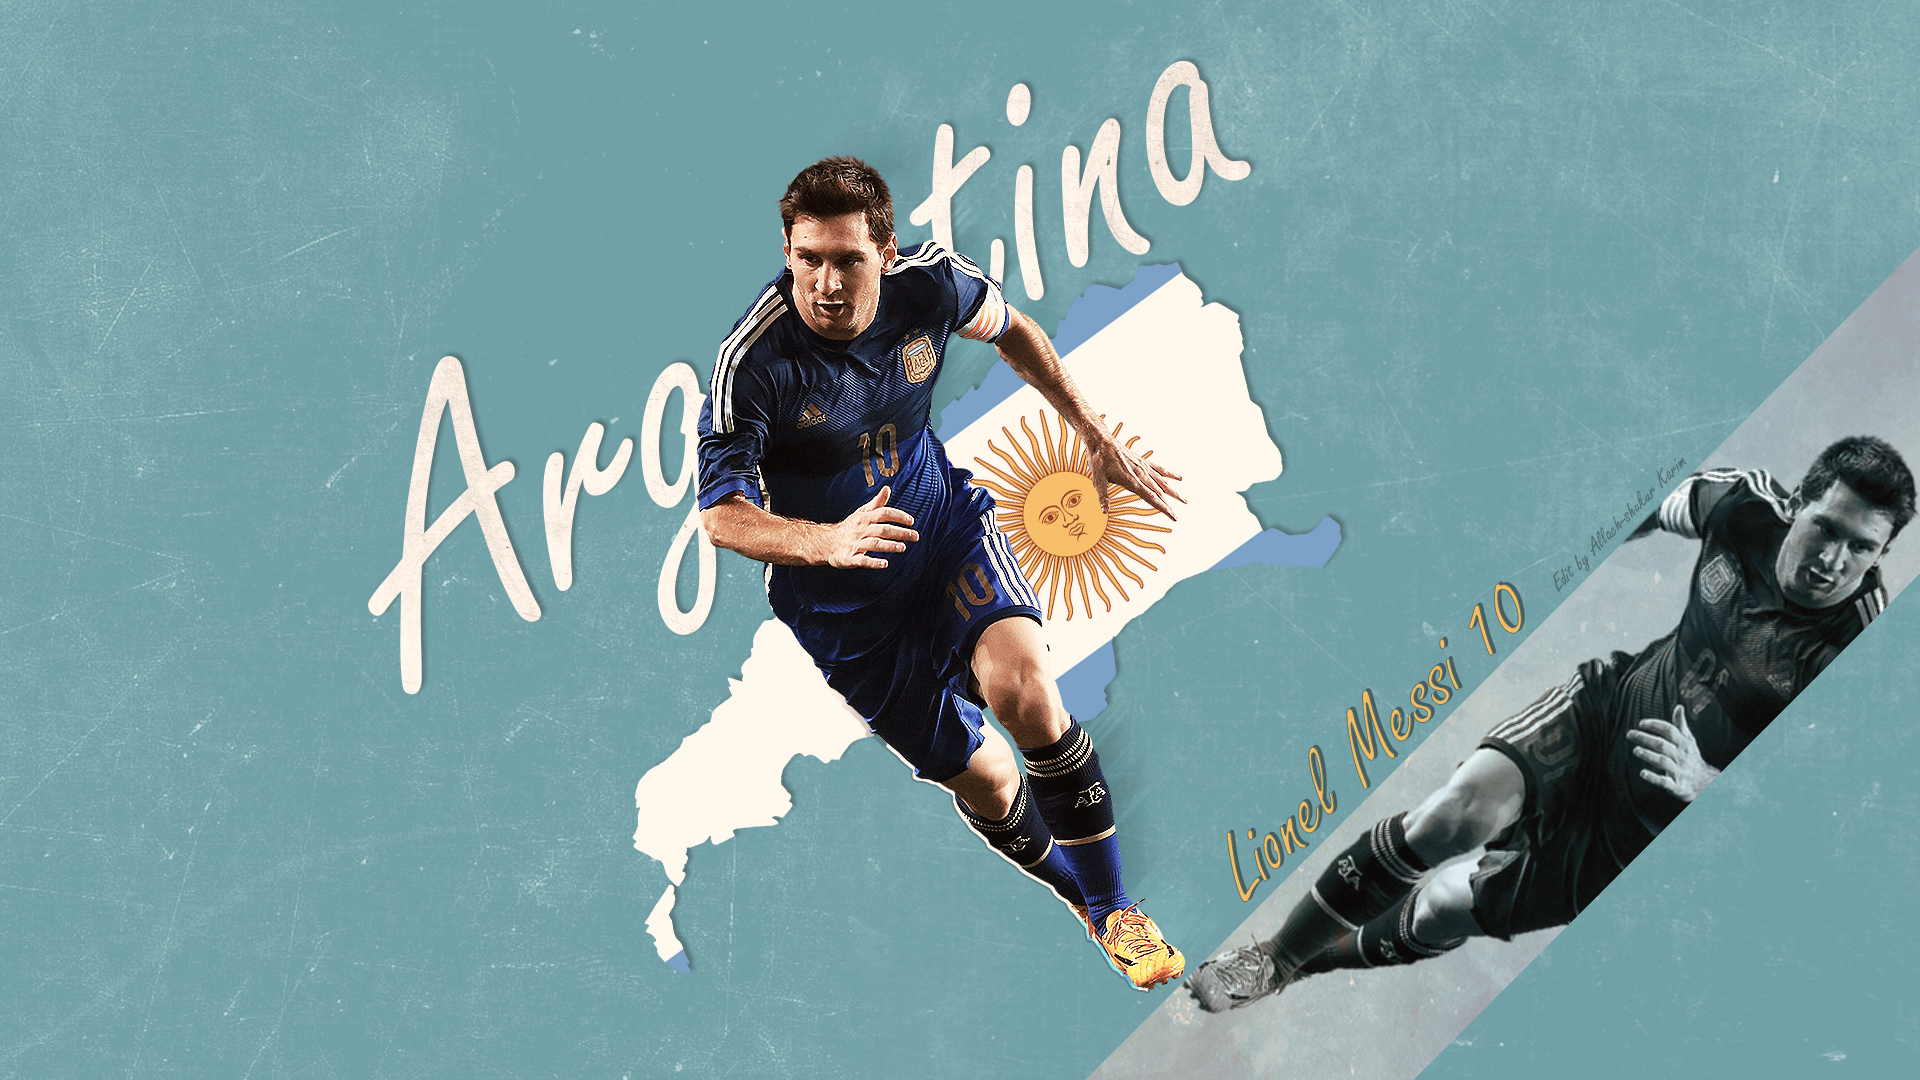 lionel messi, sports, argentina national football team, soccer